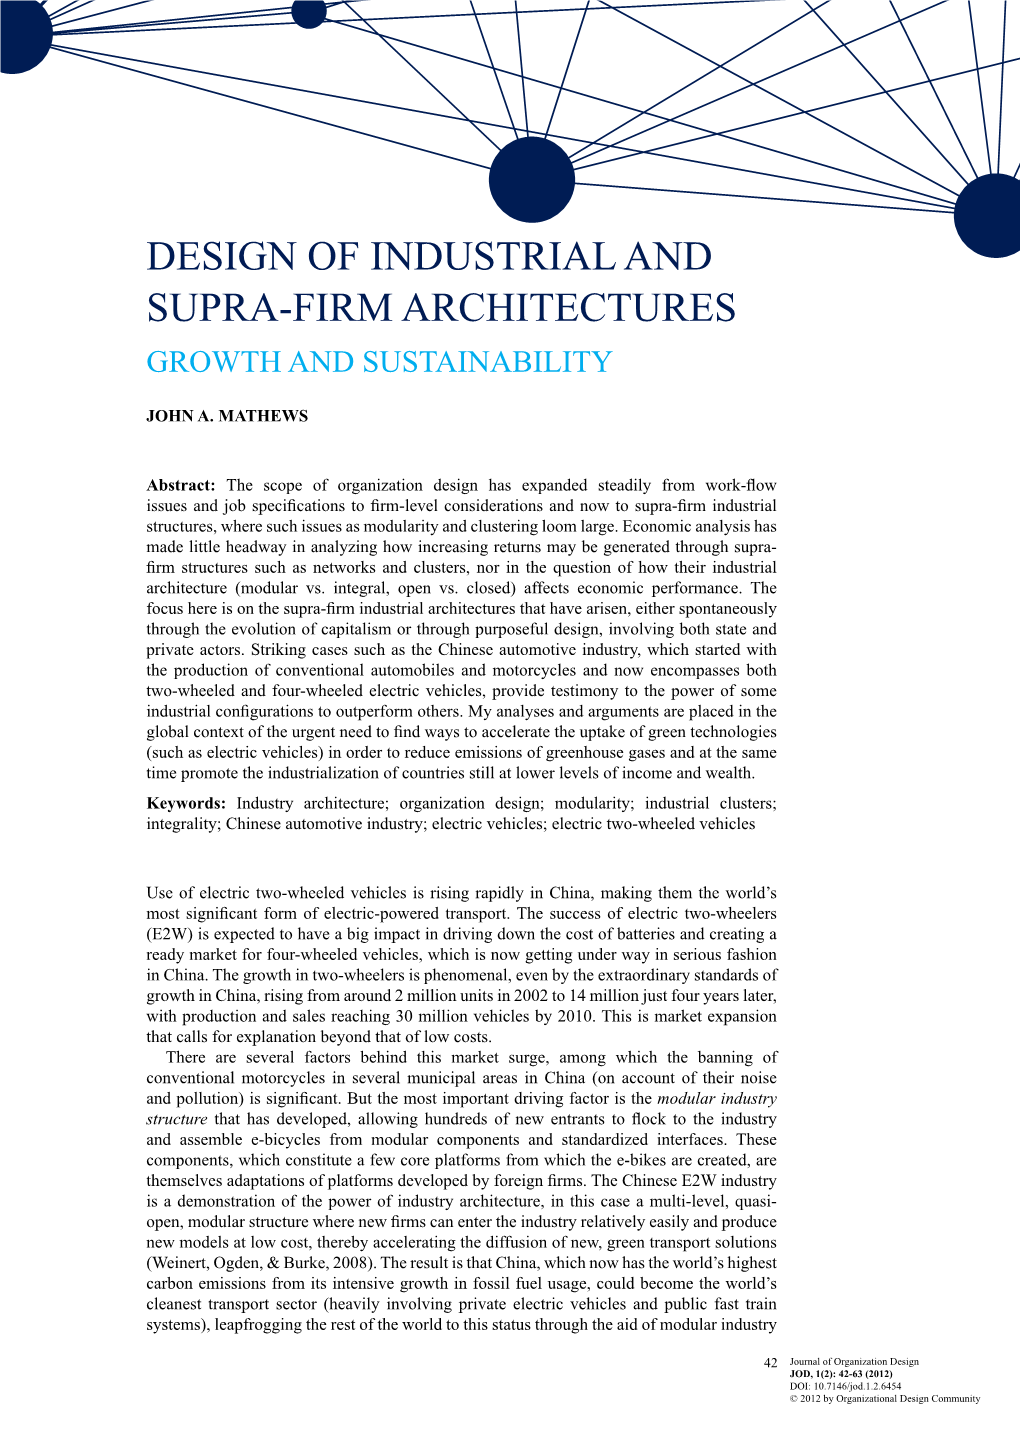 Design of Industrial and Supra-Firm Architectures Growth and Sustainability